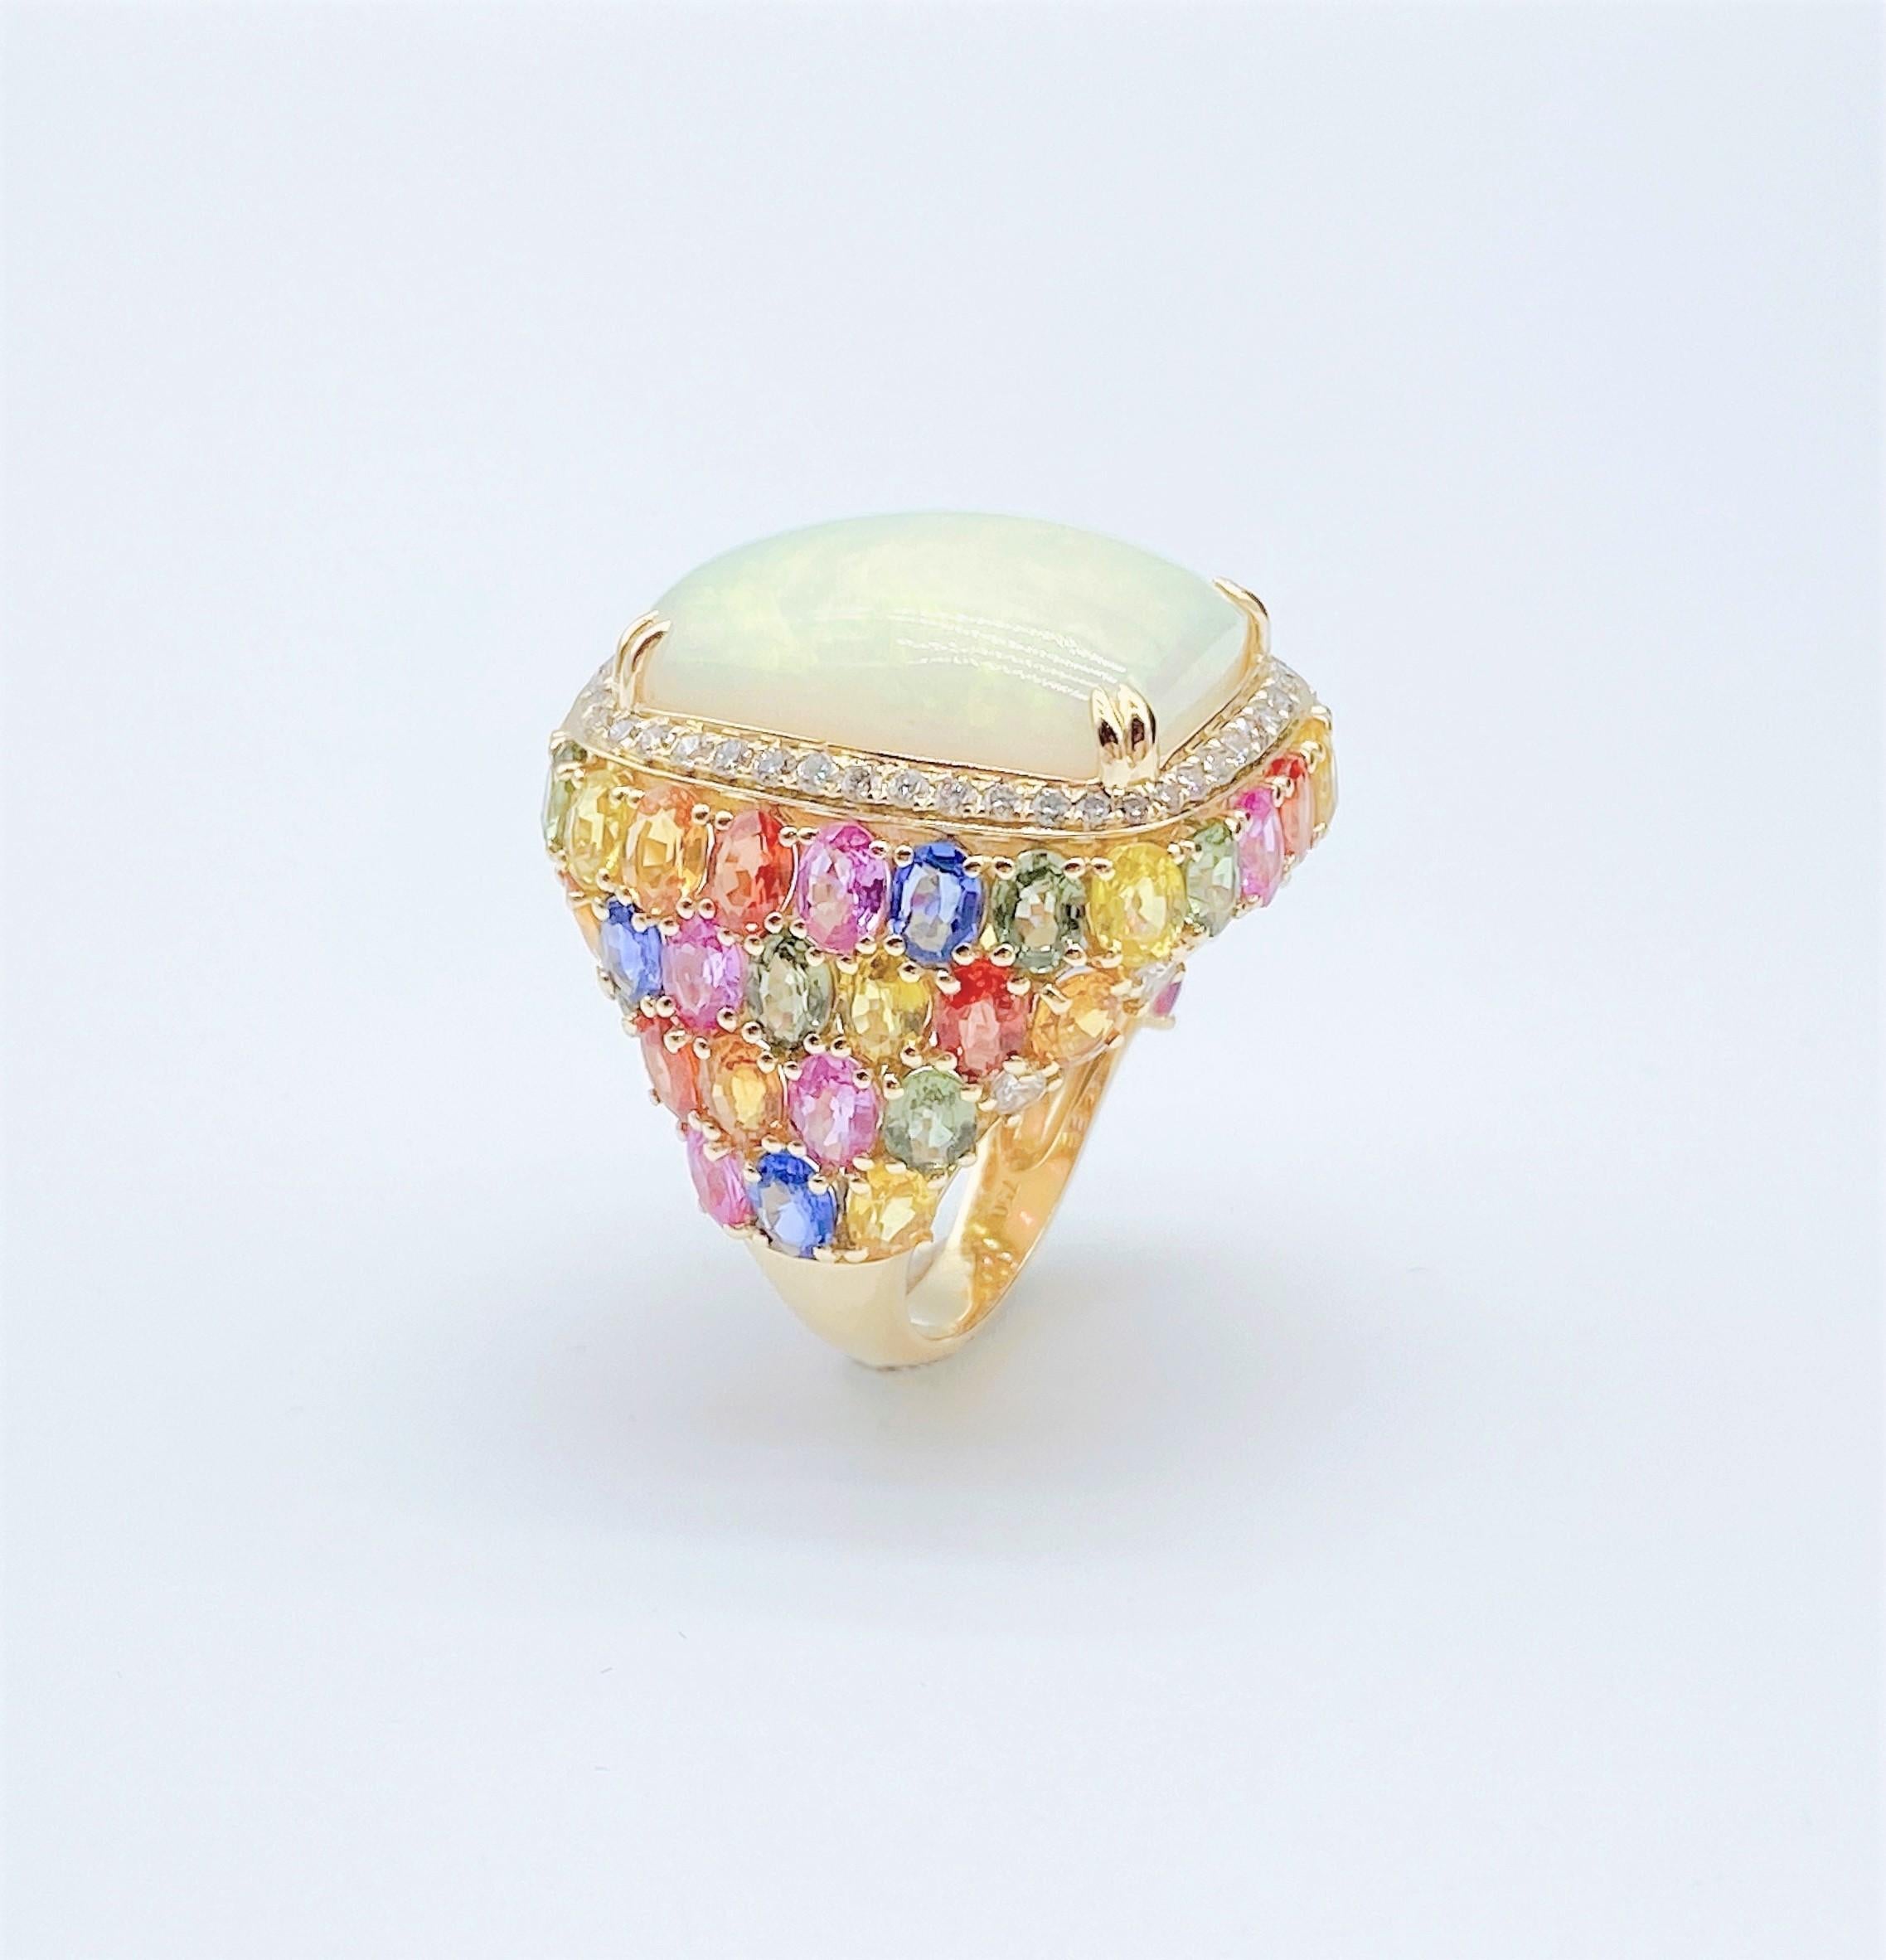 The Following Items we are offering is this Rare Important Radiant 18KT Gold LARGE Glittering and Sparkling Magnificent Fancy Large Opal and Fancy Rainbow Colored Sapphire White Diamond Ring. Ring Contains a Beautiful Gorgeous Large Round Opal